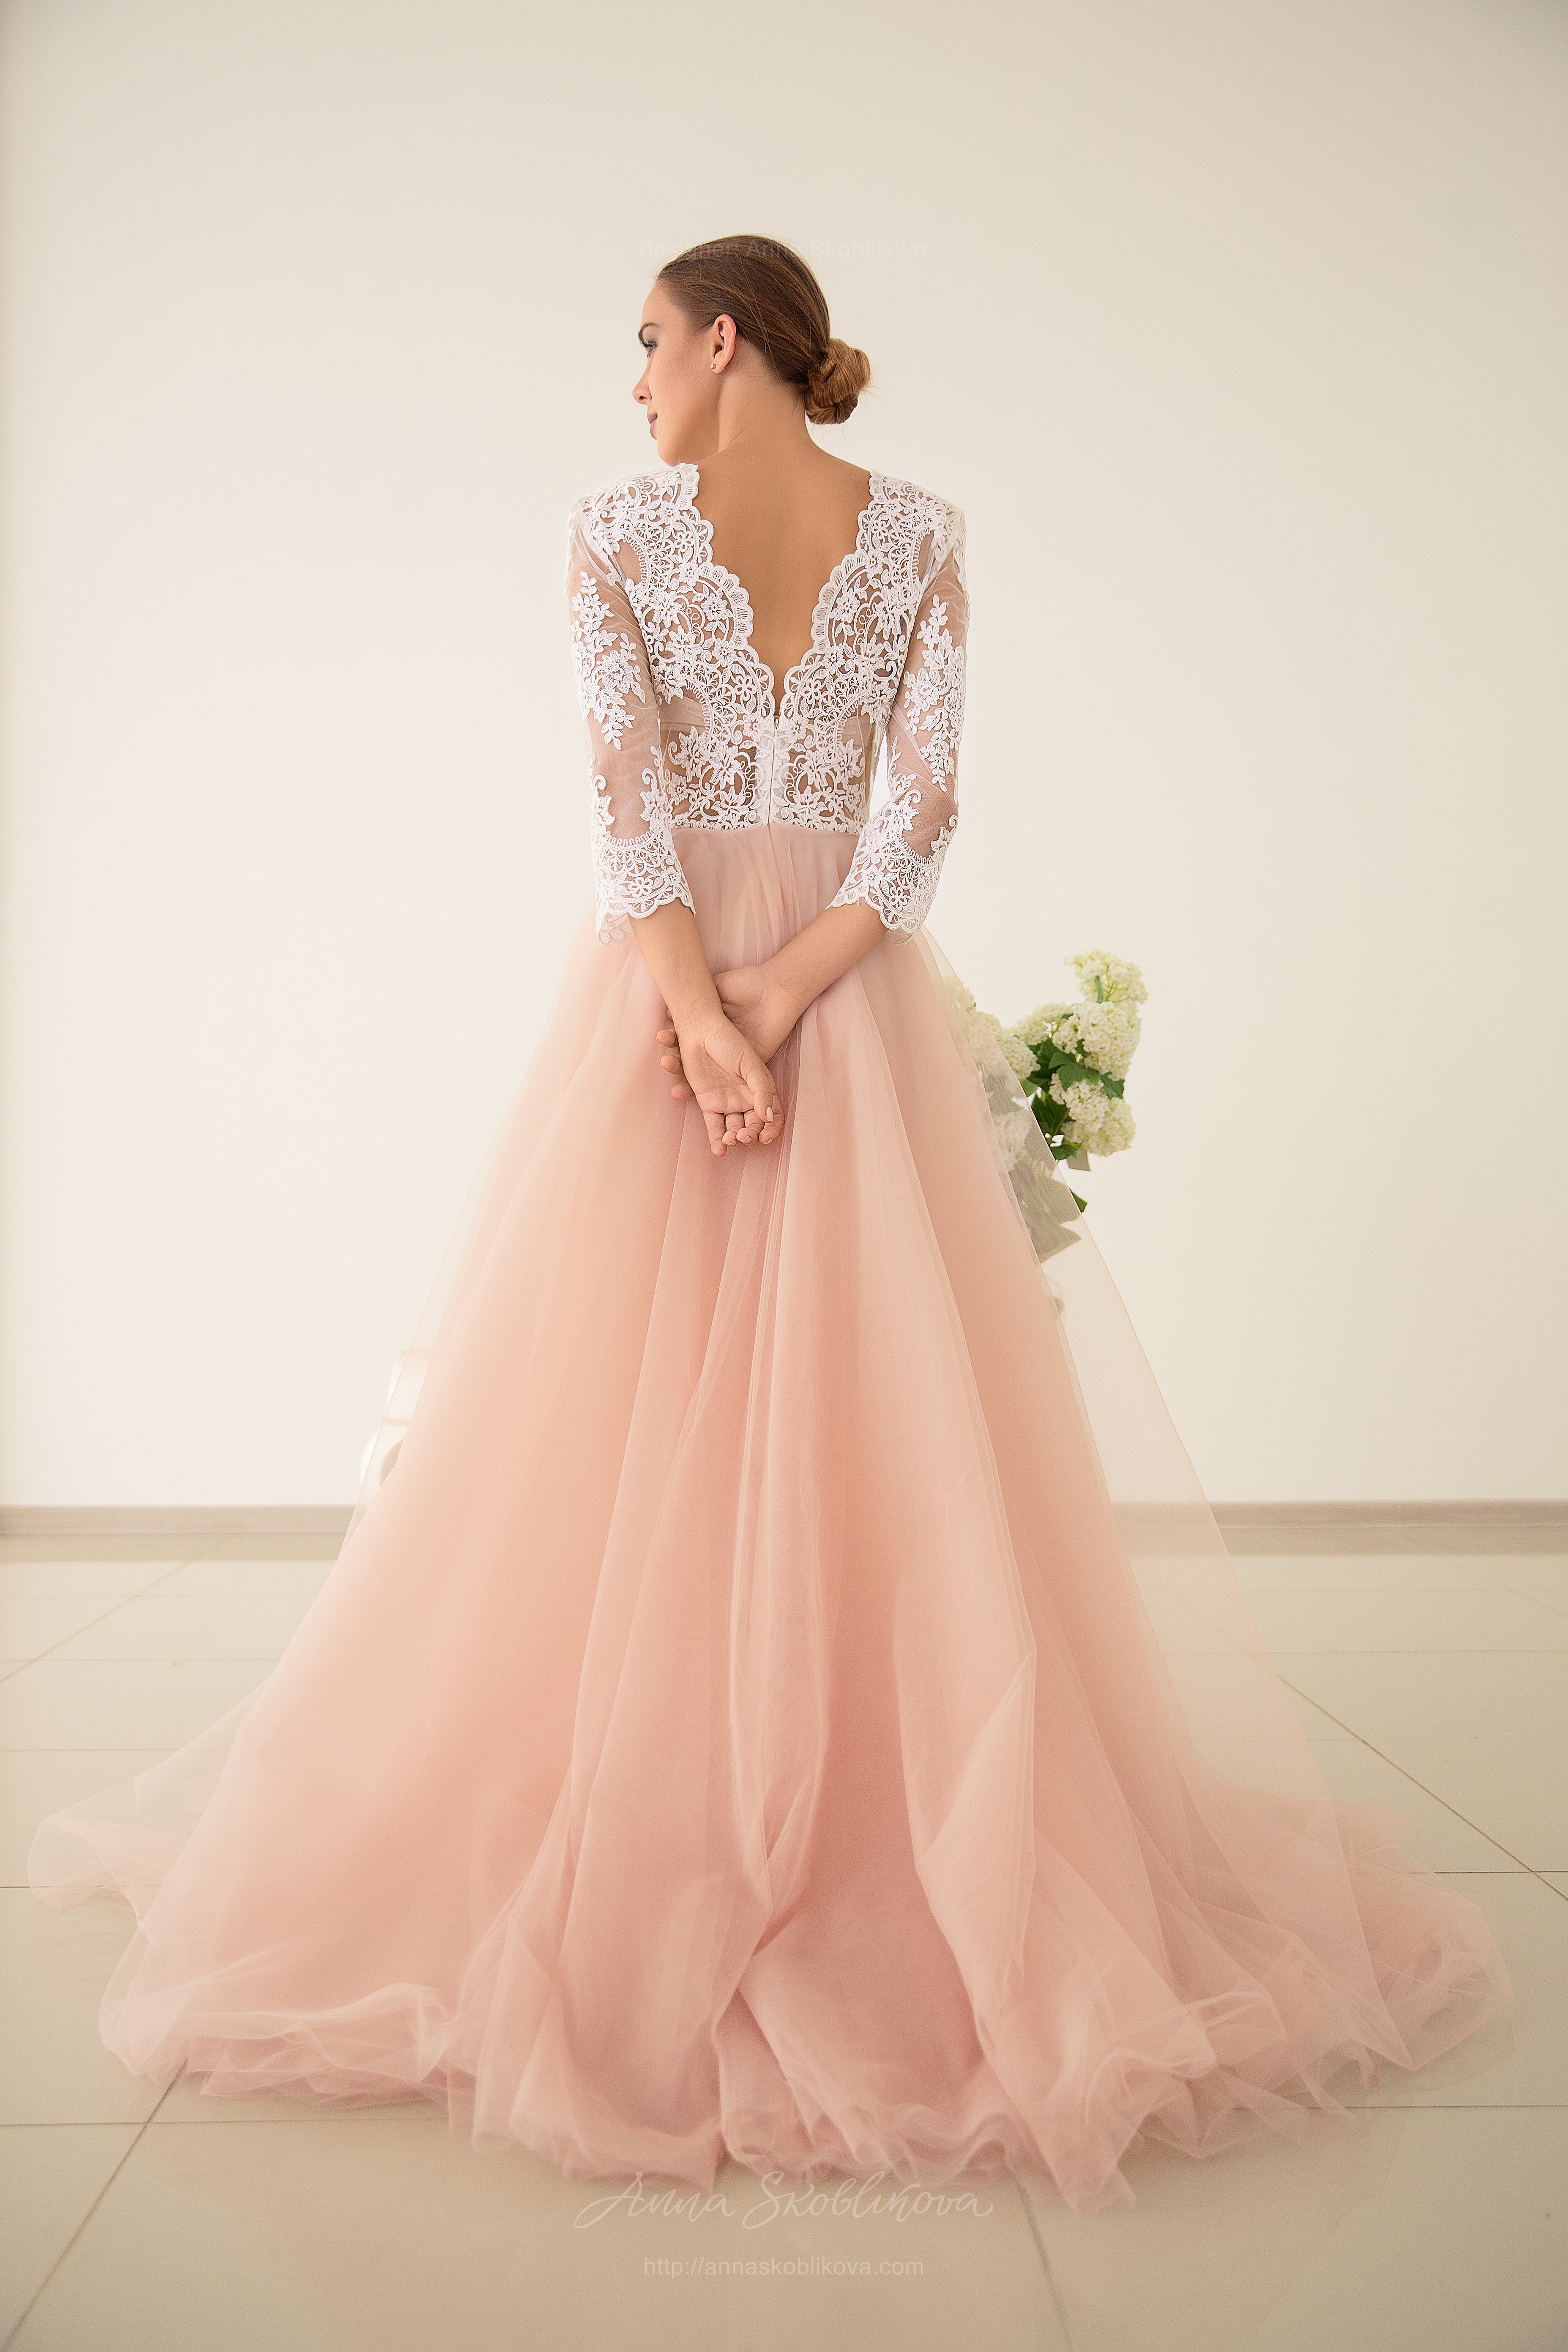 Amazing Pink Gowns Dress For Weddings in the world Learn more here 